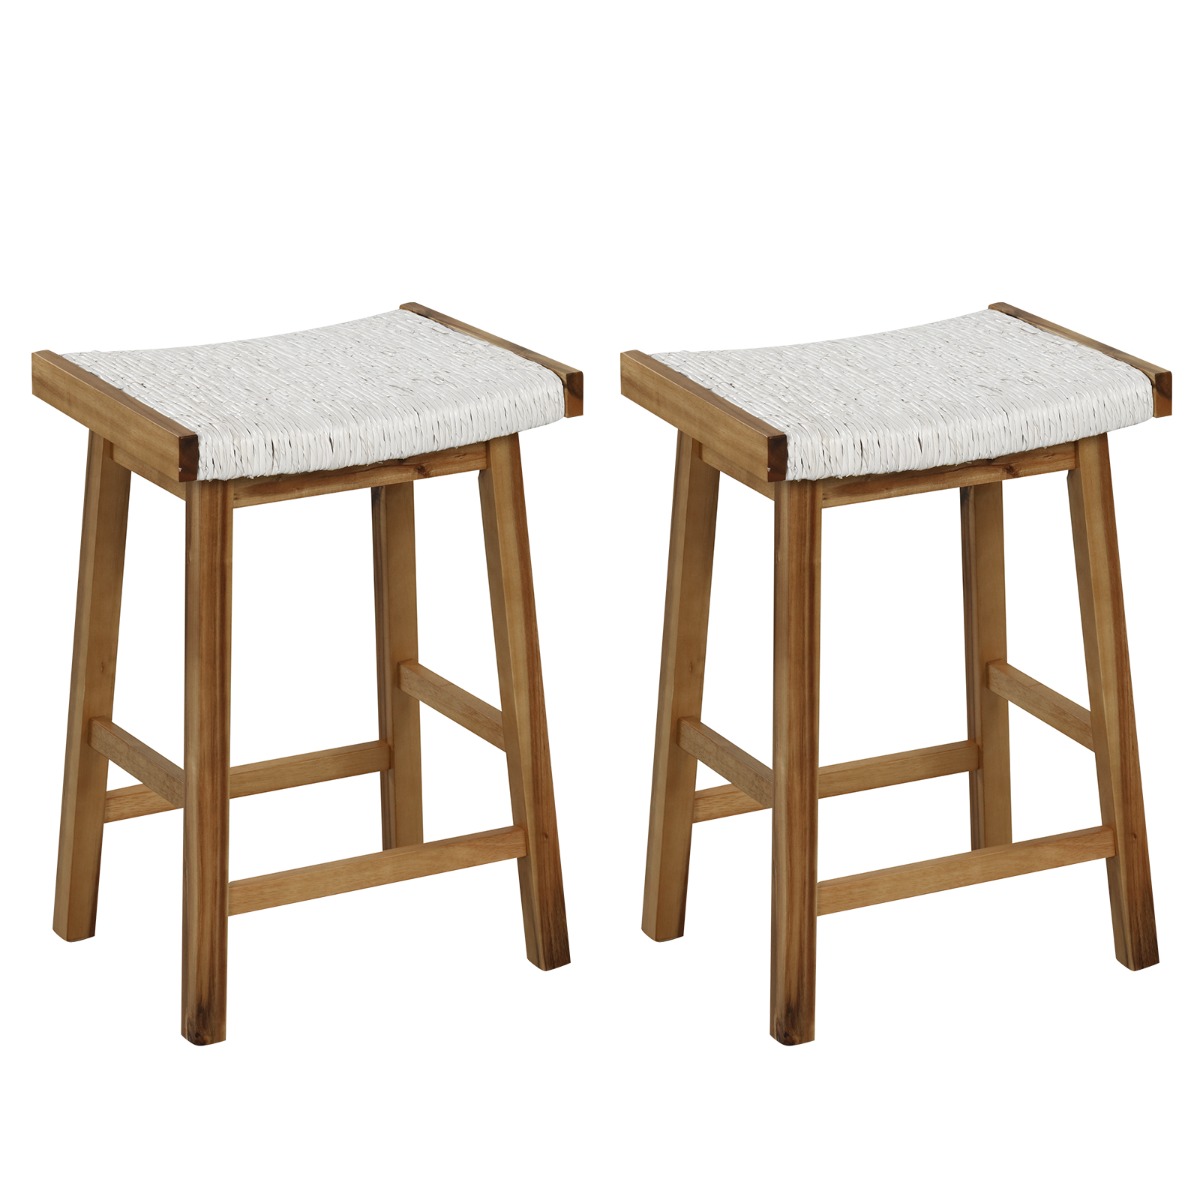 Set of 2 65cm Barstools with Seaweed Woven Seat